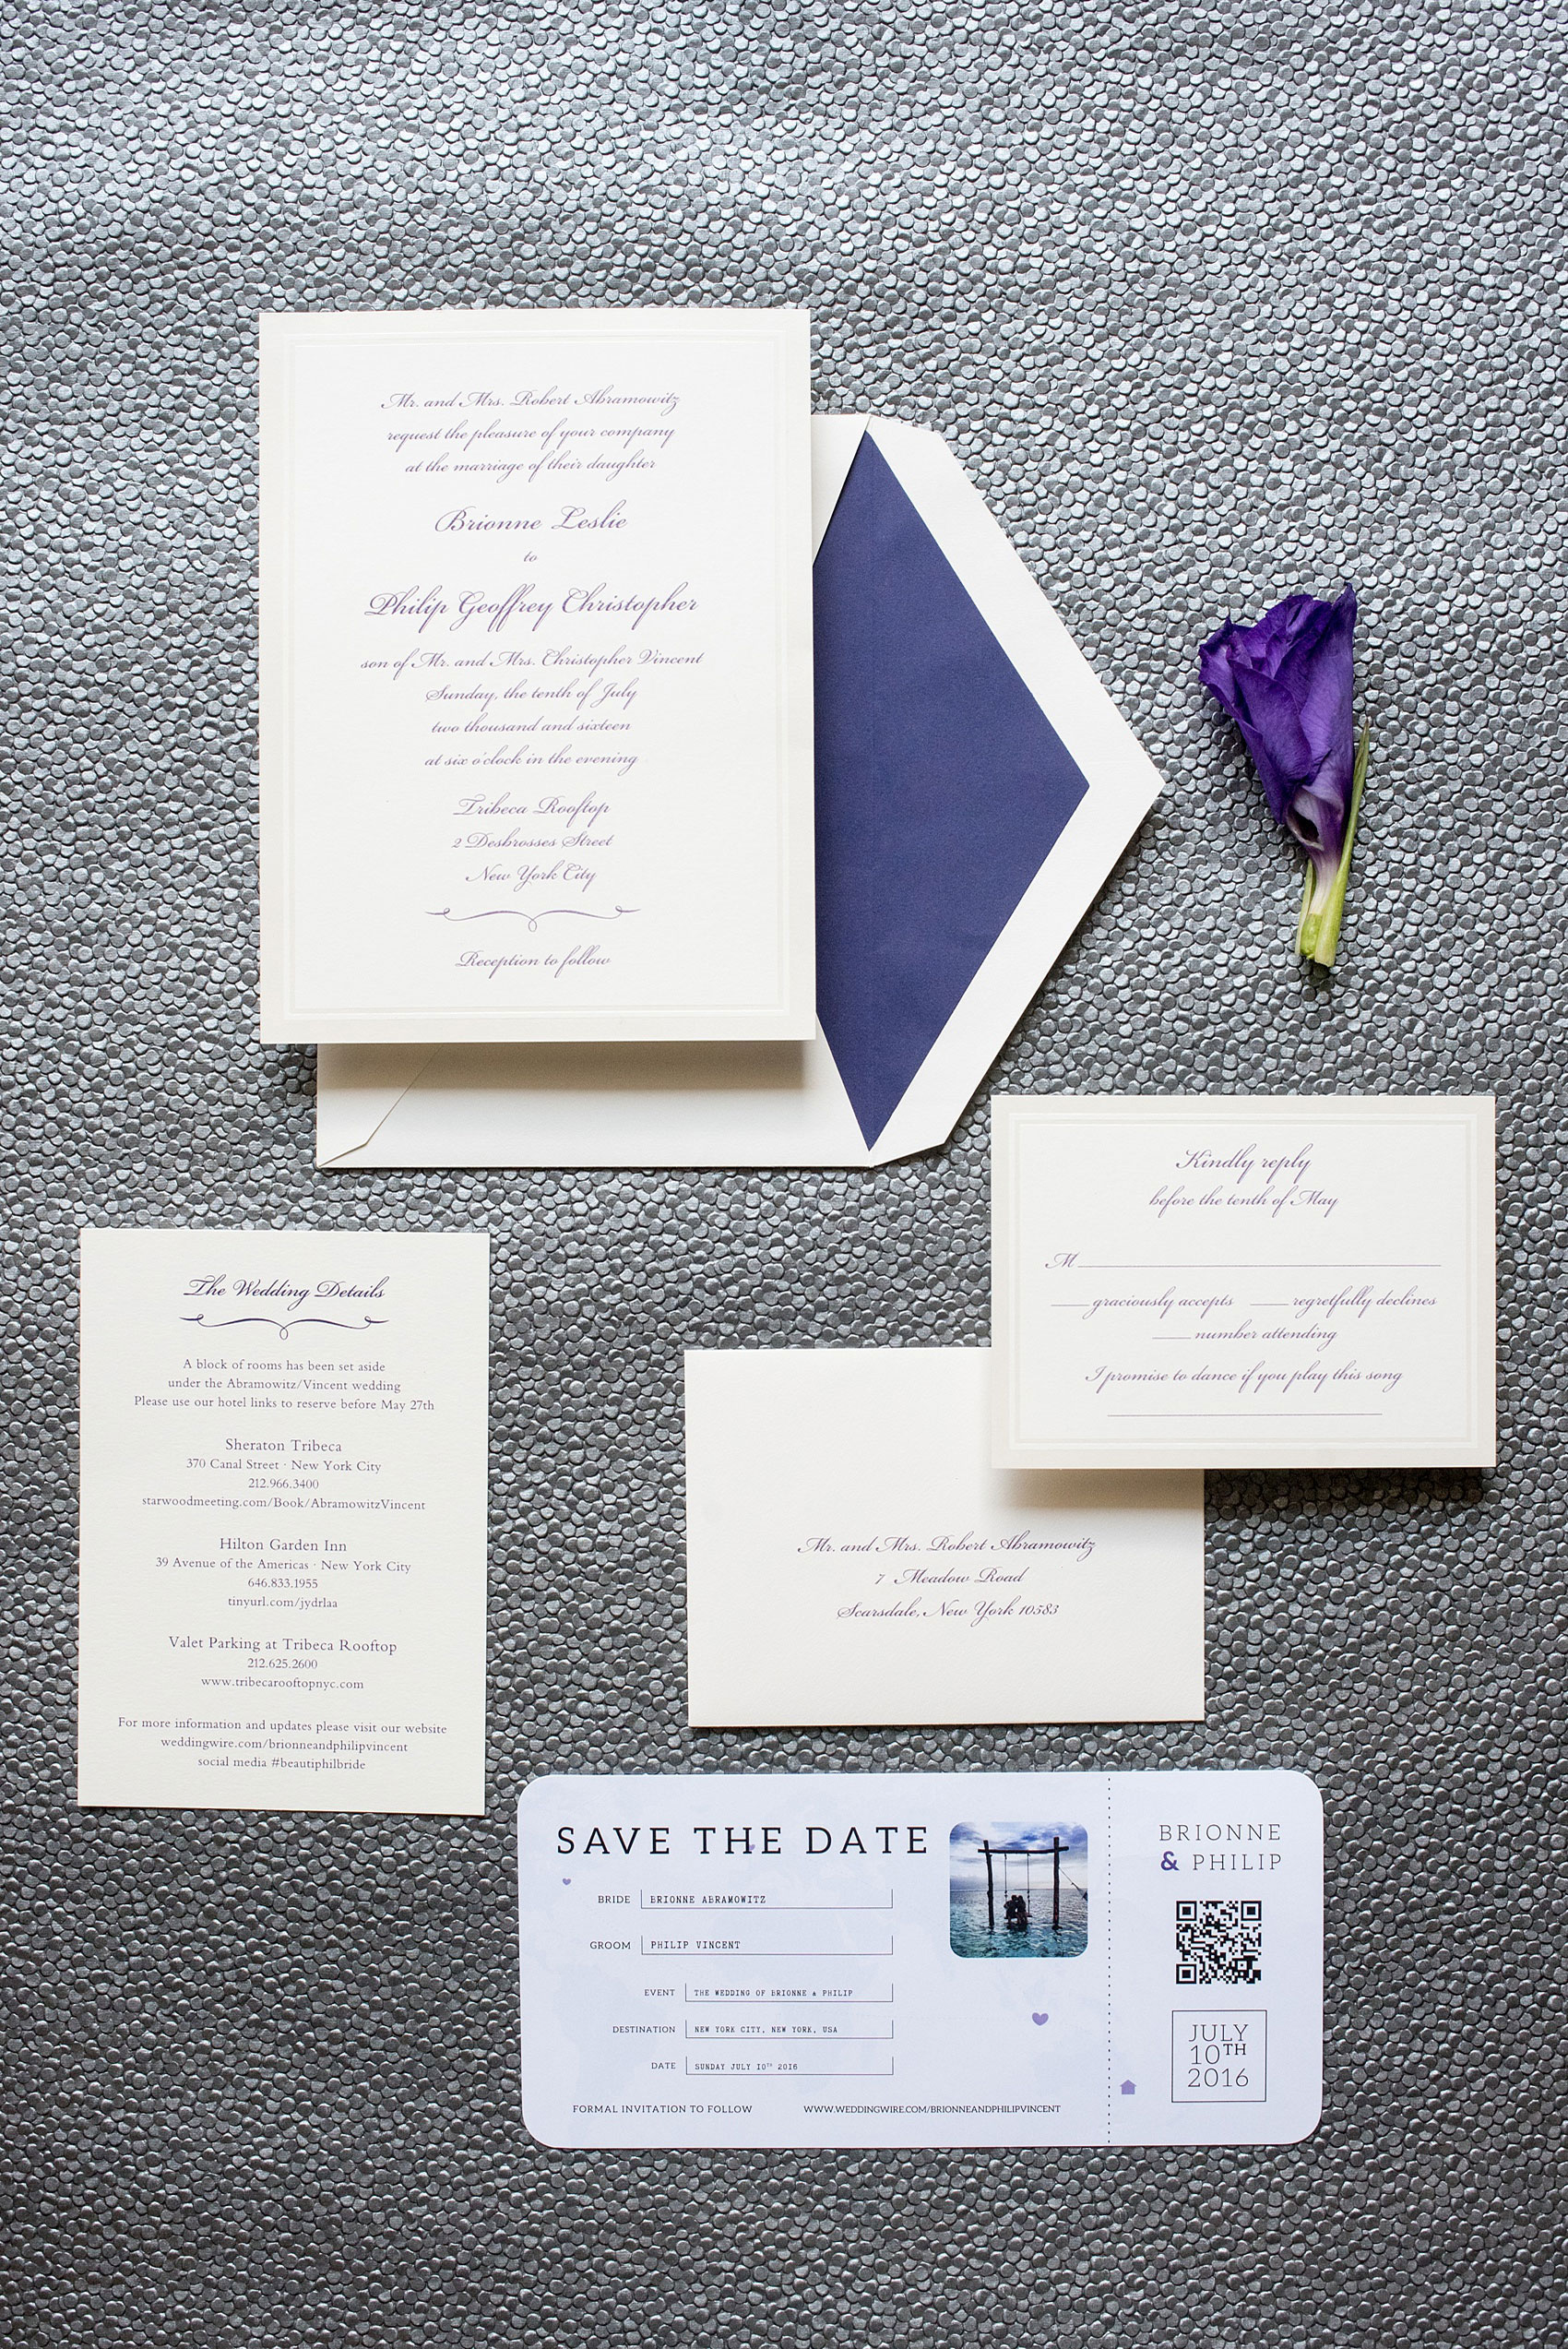 Mikkel Paige Photography photos of a NYC wedding at Tribeca Rooftop. Purple and off white classy wedding invitation and plane ticket save the date.